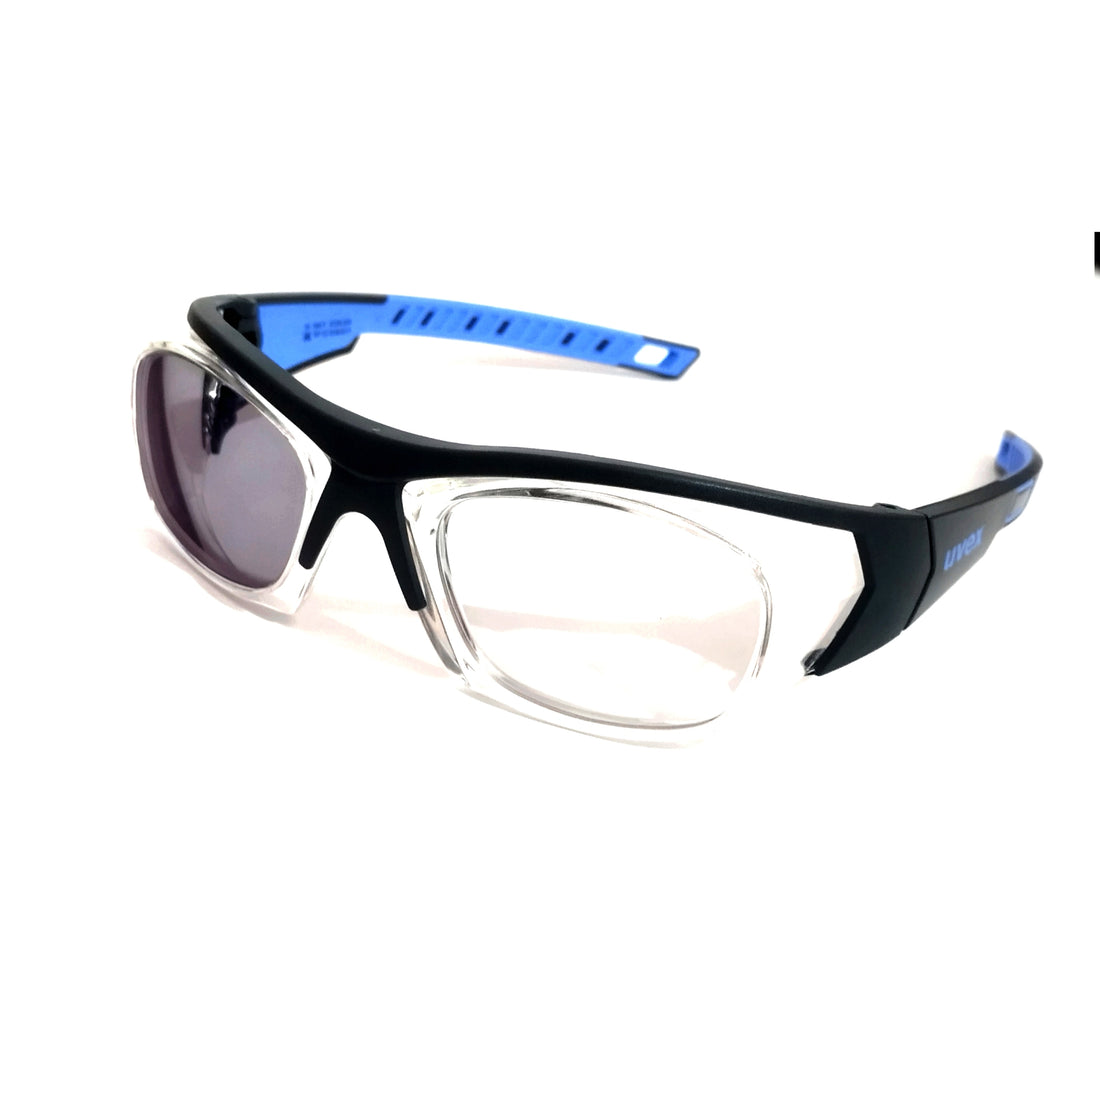 What are Photochromic Glasses